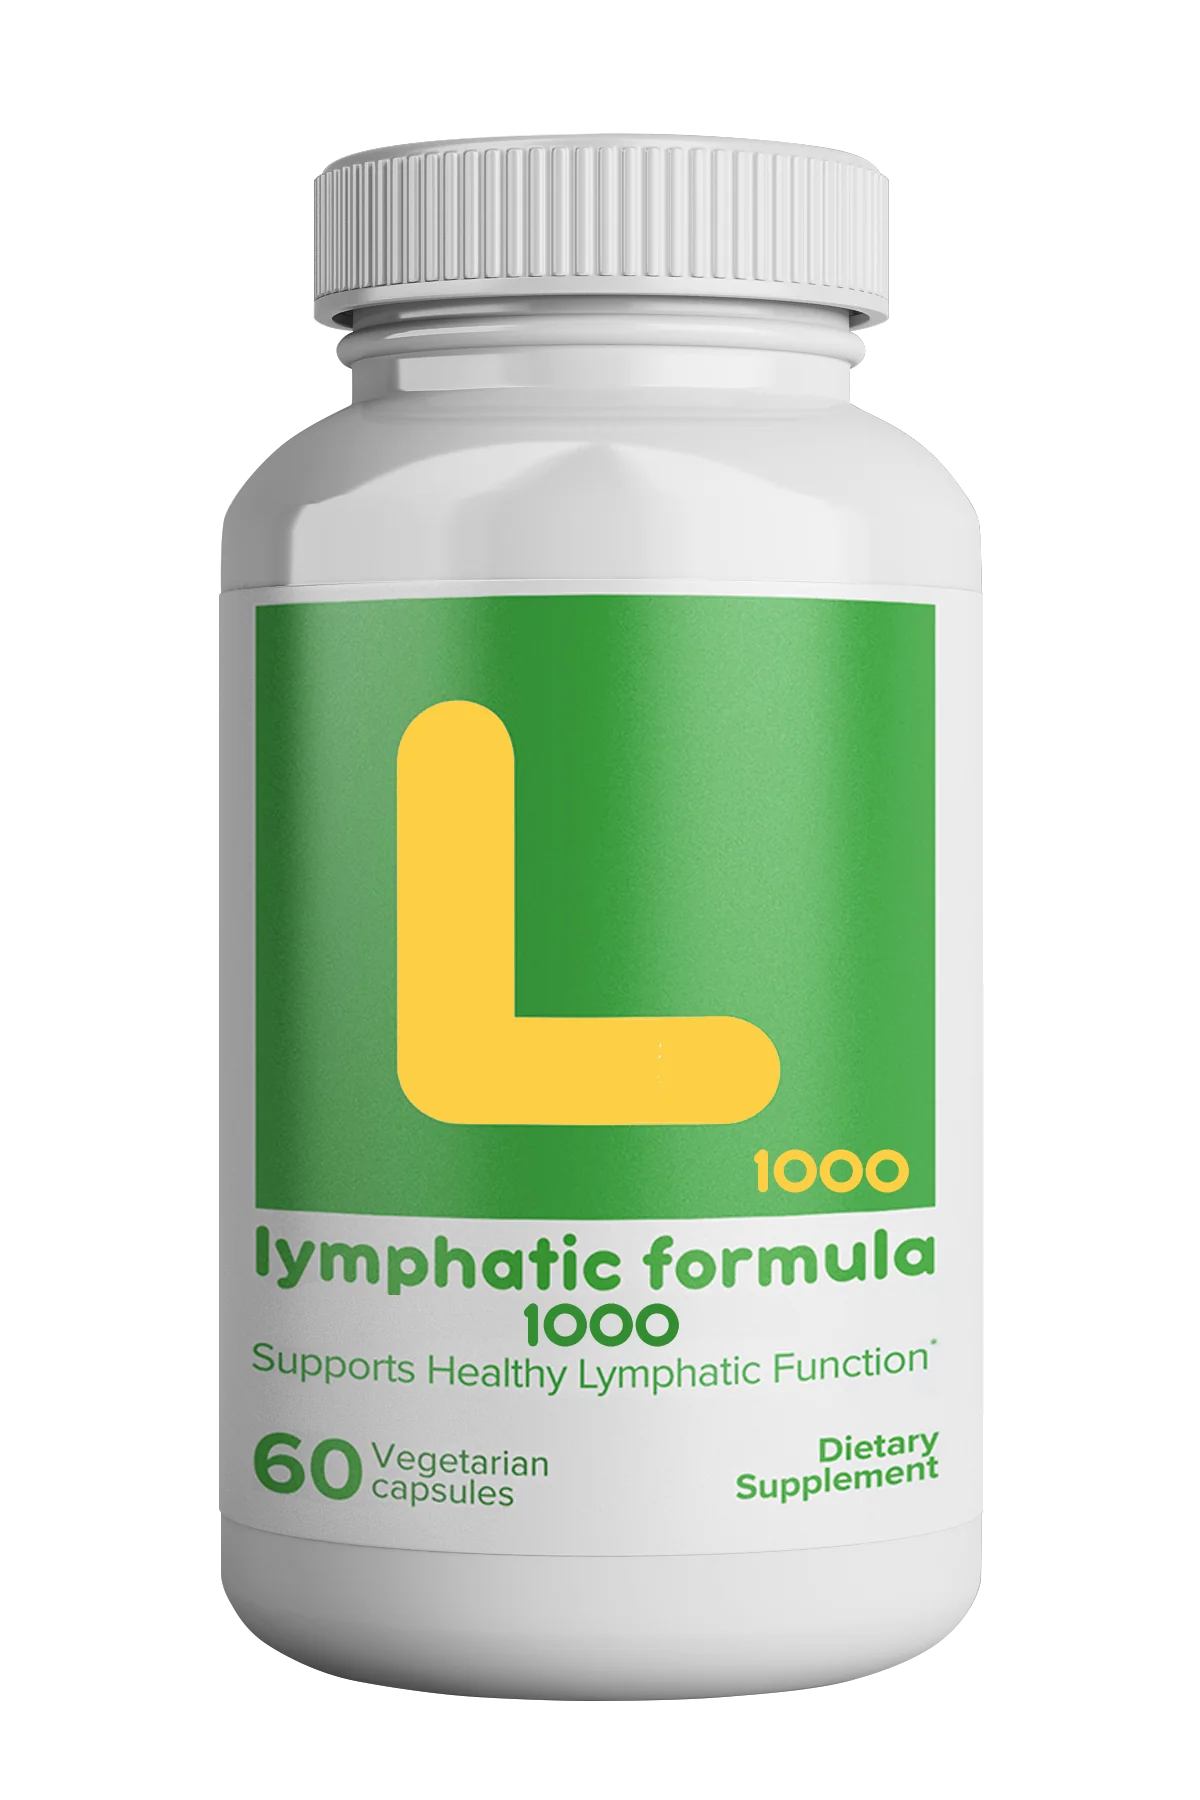 lymphatic formula 1000 healty supports